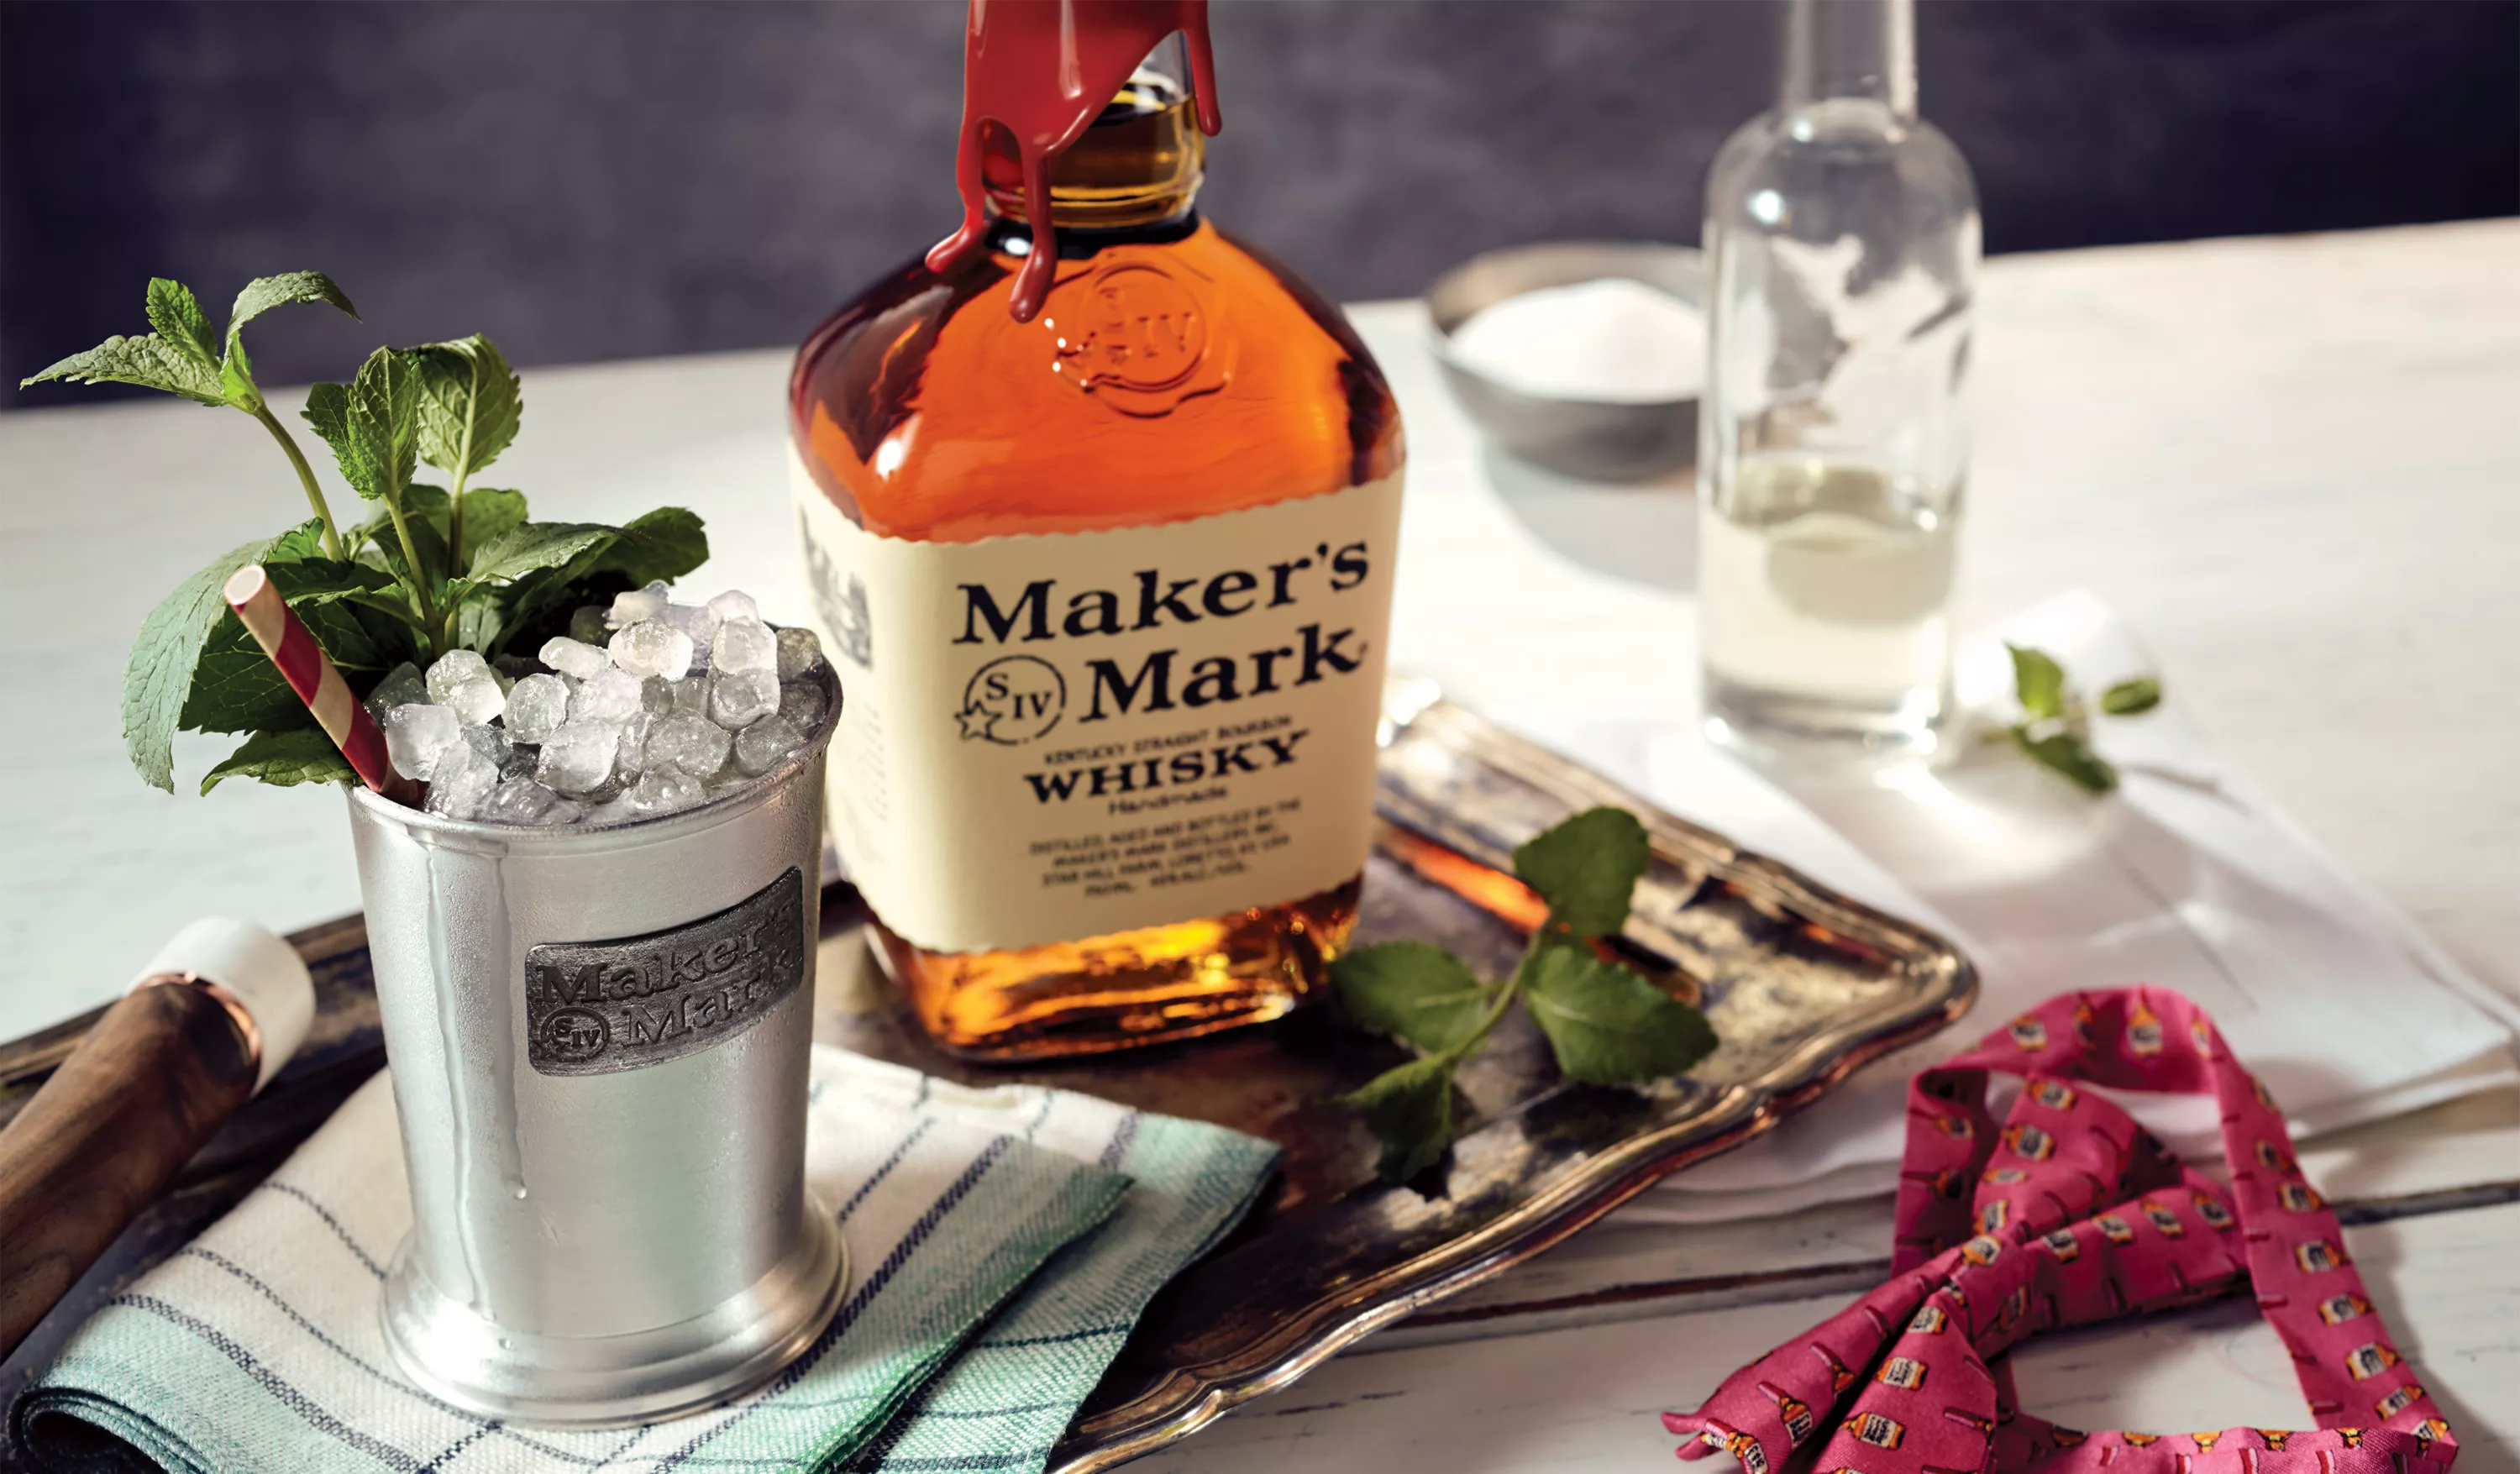 A bottle of Maker's Mark is next to a metal cup with a metal Maker's Mark label on the side. Inside the cup is a Maker's Mark Mint Julep cocktail, garnished with a striped straw and a sprig of mint. 